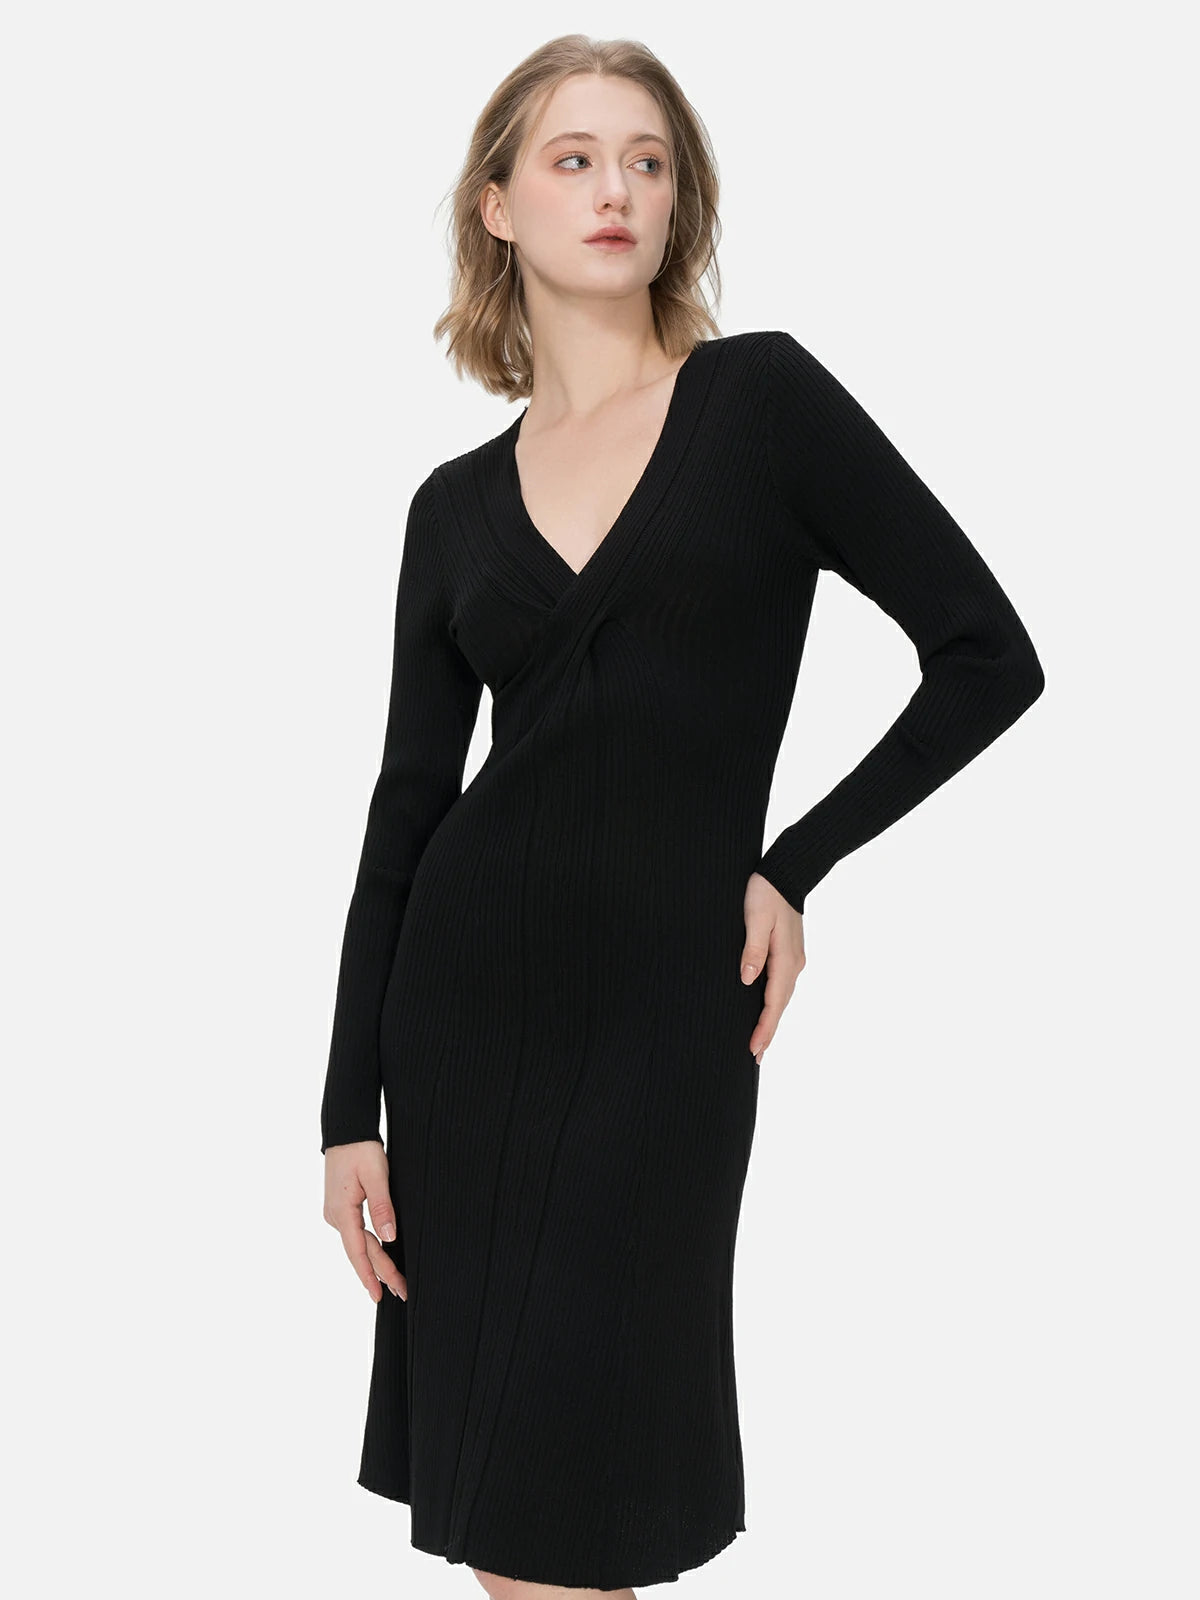 Redefine your wardrobe with this body-hugging black knit midi dress, adorned with a cross V-neck design and intricate knit details.